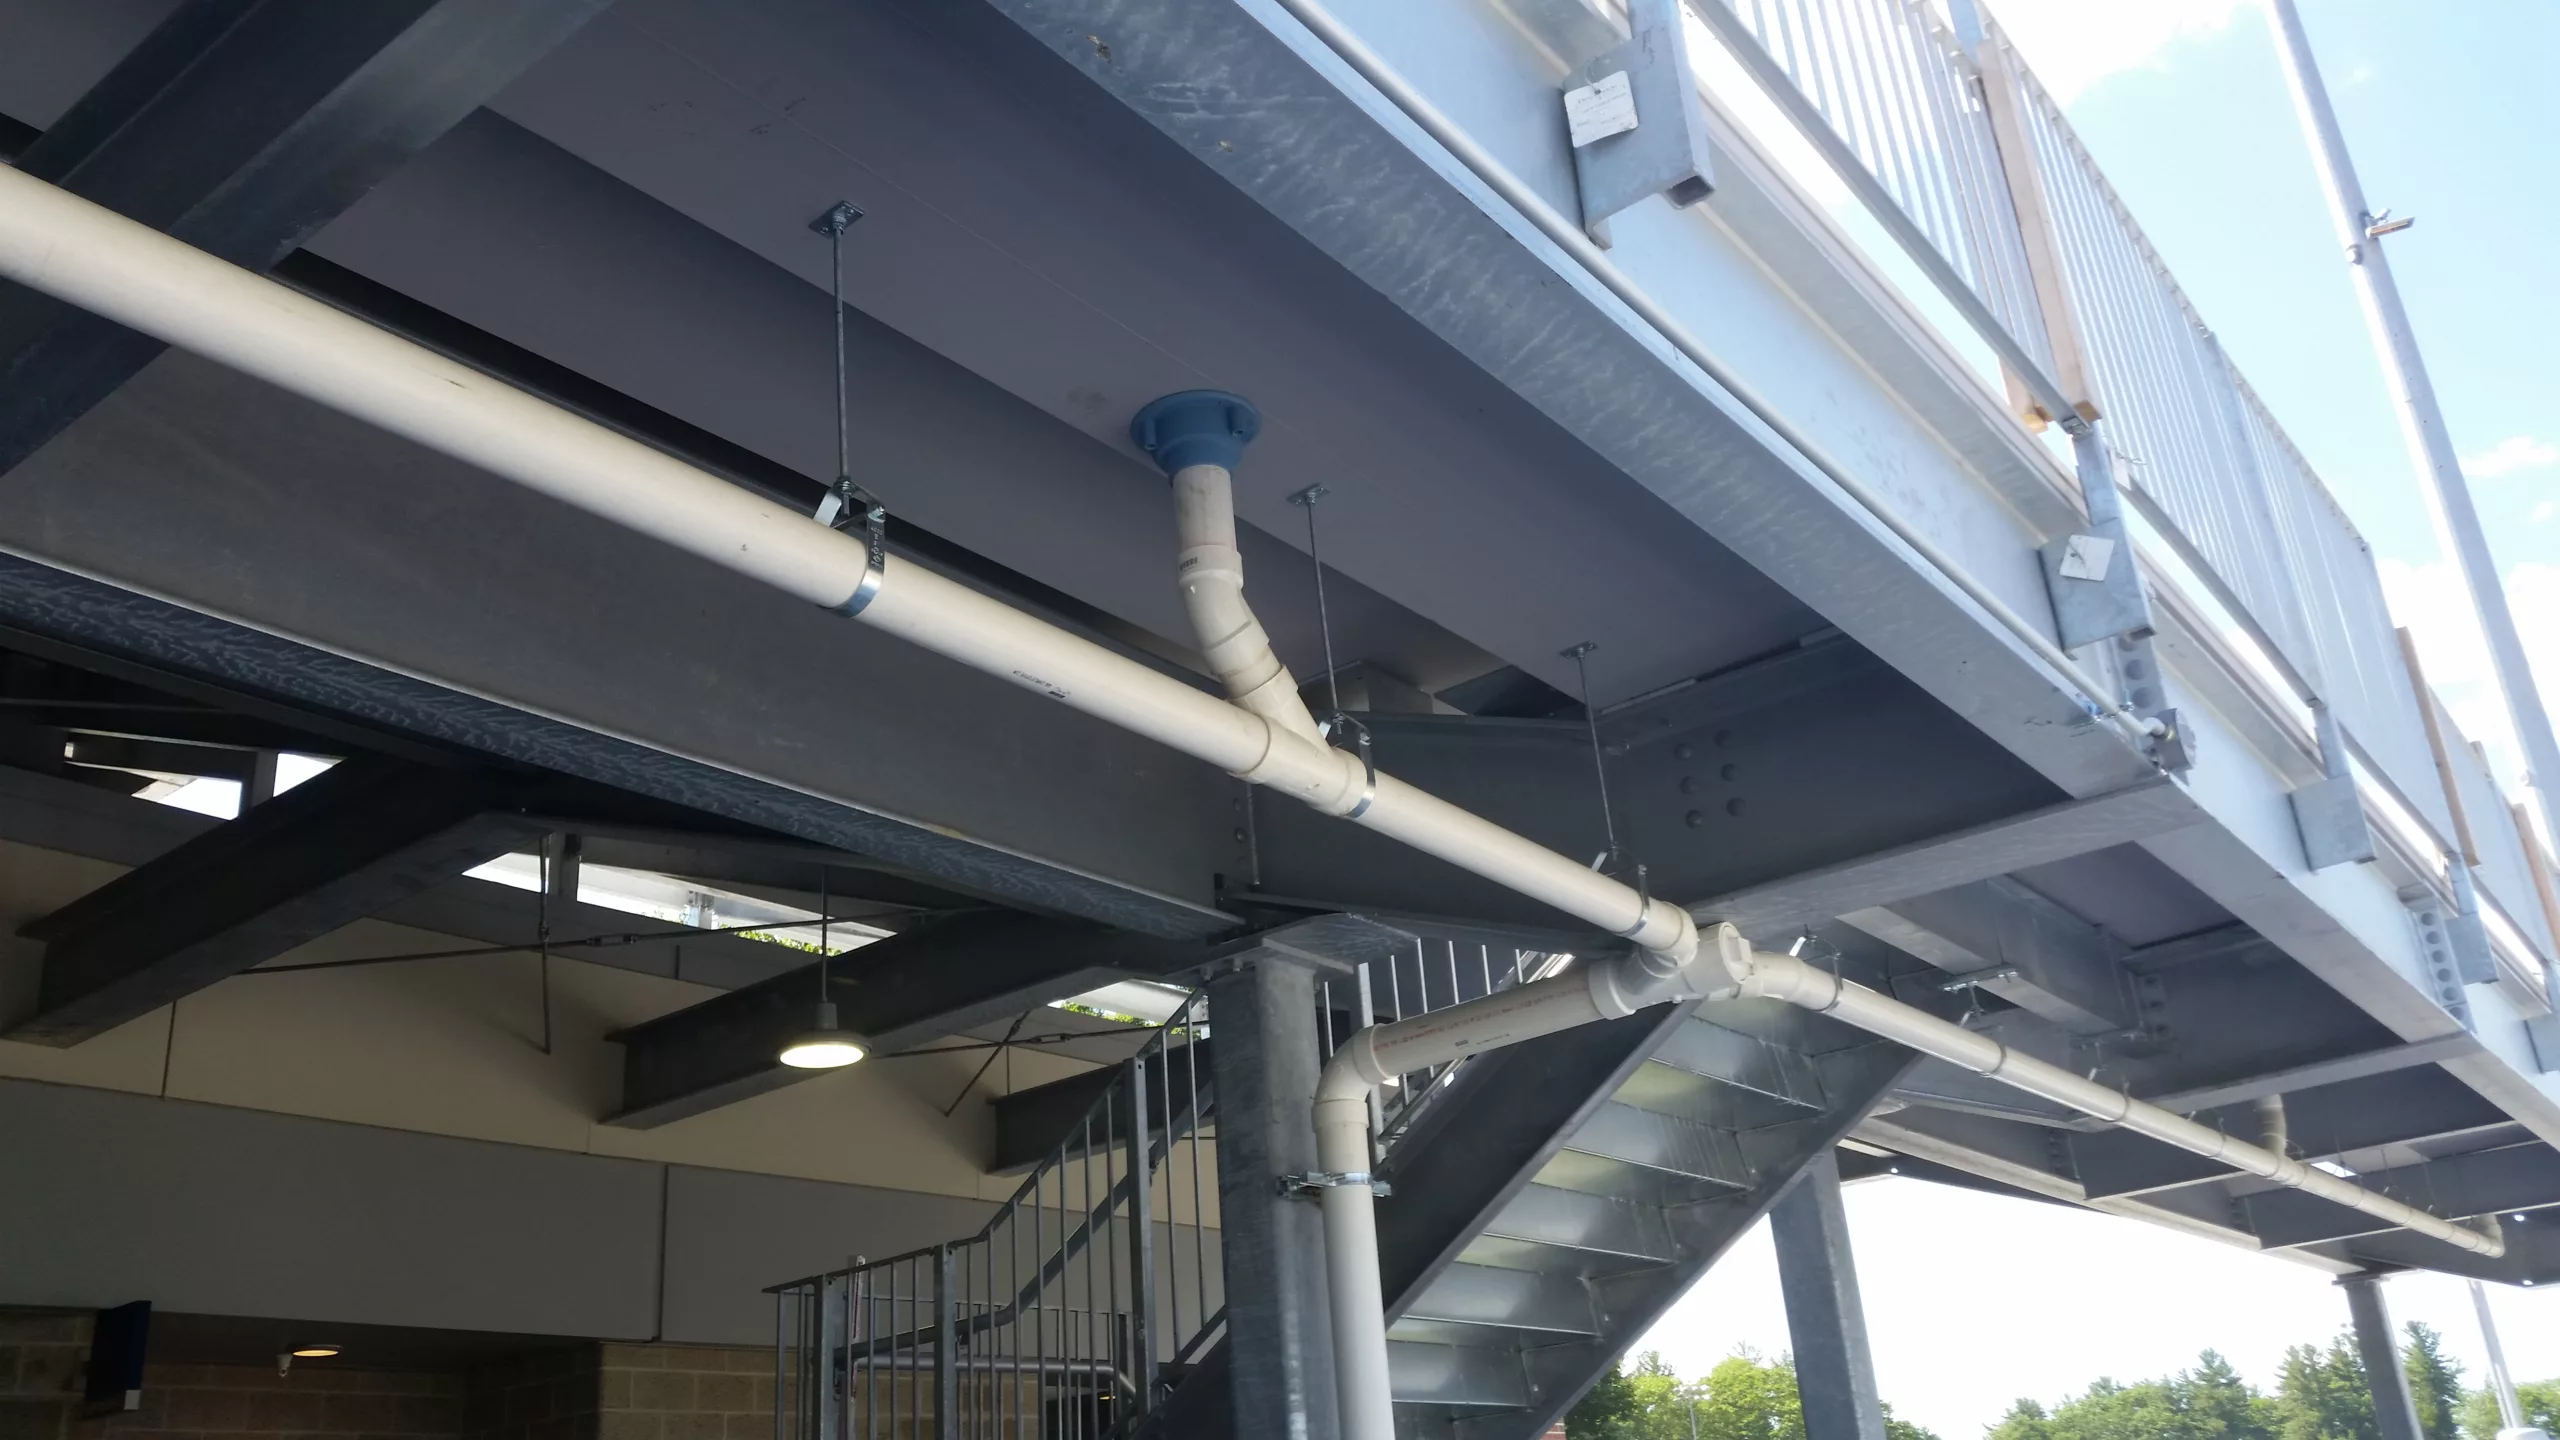 image of drainage system integrated into long span aluminum riser system for water control